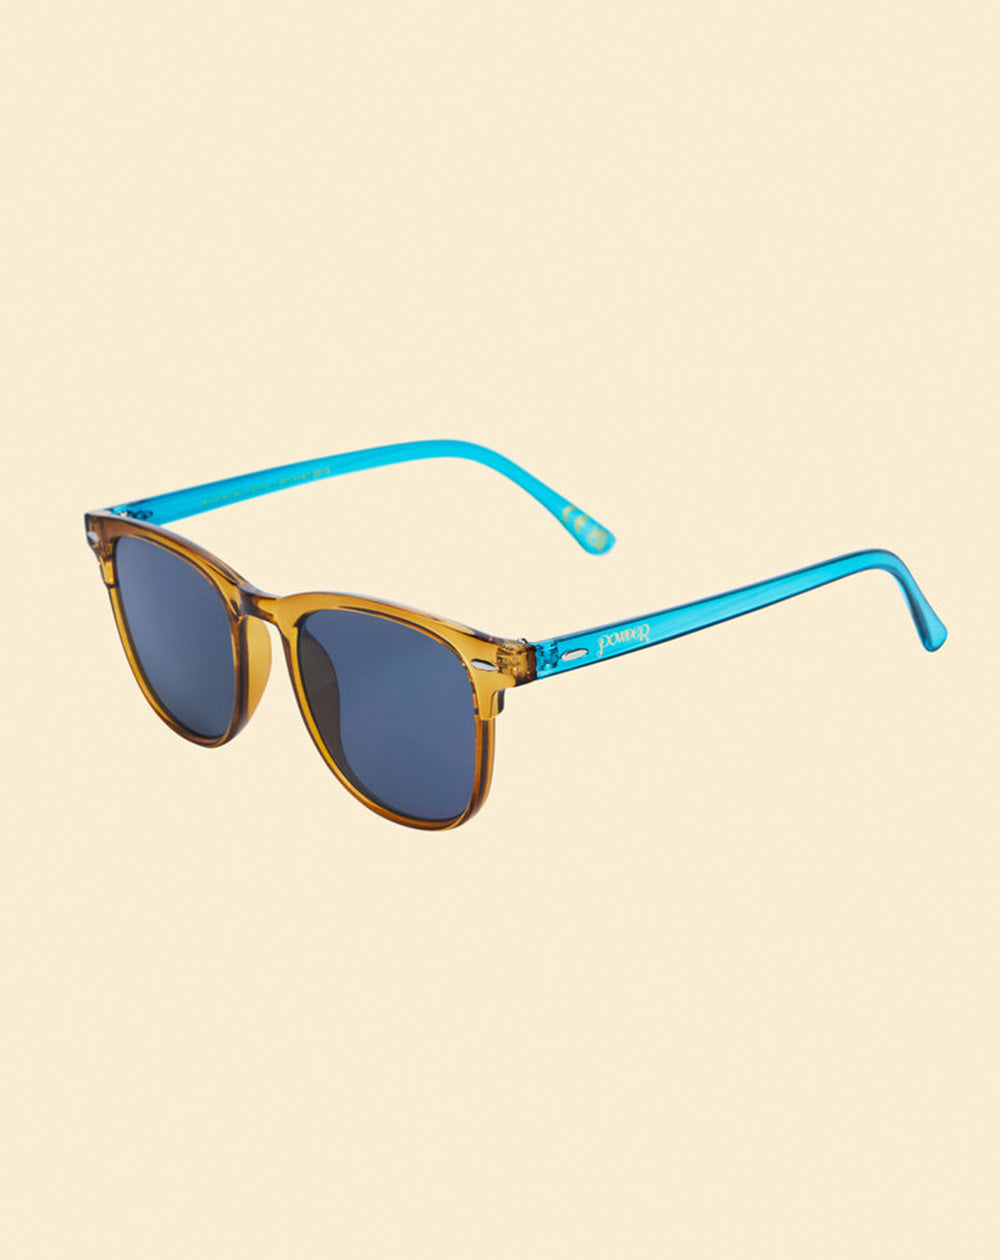 Powder CAR12 - Limited Carina Sunglasses in Turquoise/Nude